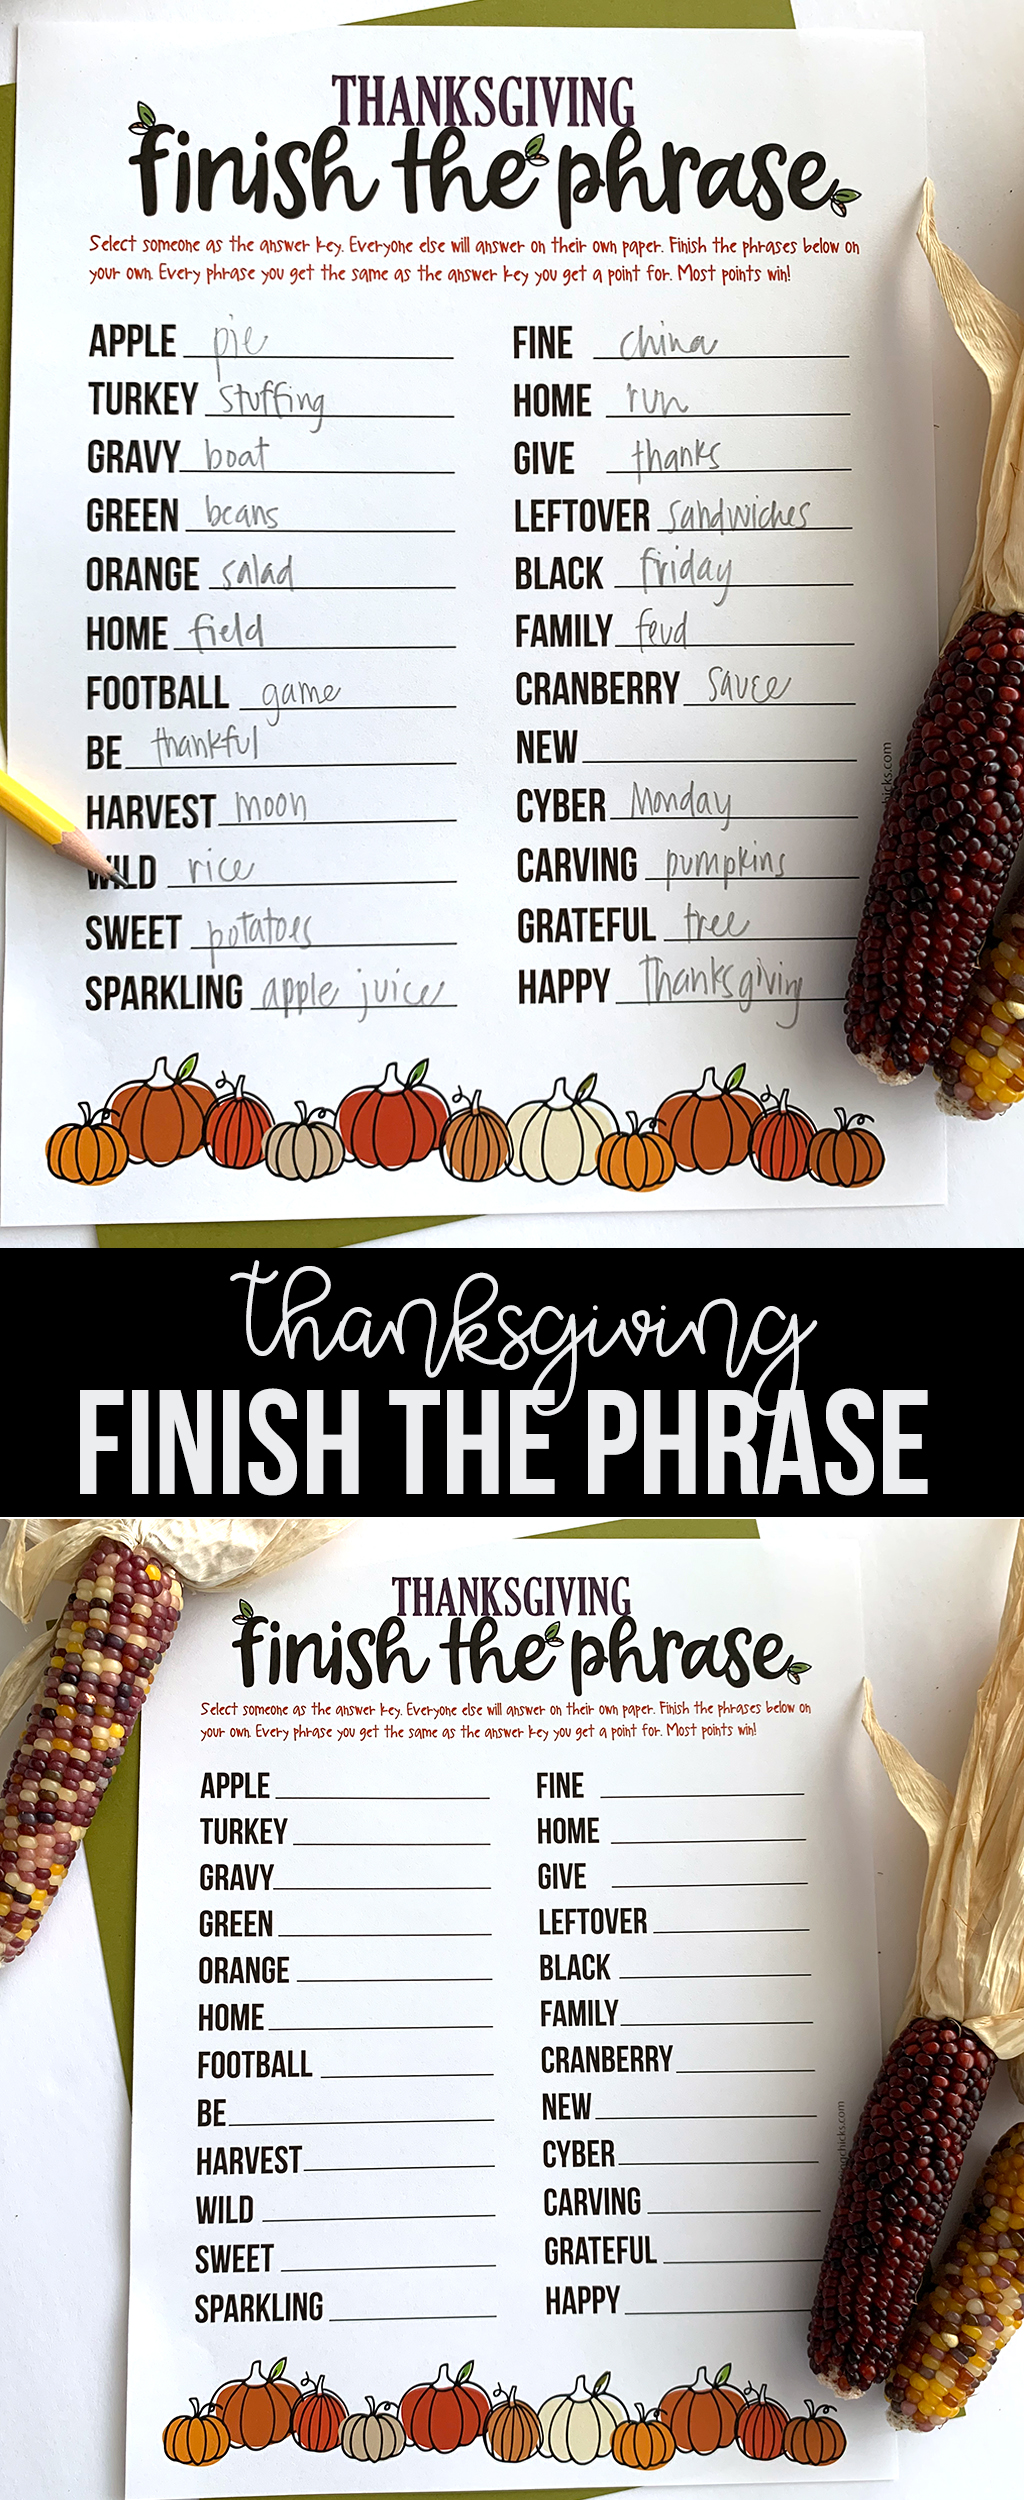 We love to play games around the Thanksgiving table. This Thanksgiving Finish the Phrase Printable is a big hit at our house. #thanksgiving #thanksgivinggames #thanksgivingprintable #thanksgivingprintablegames